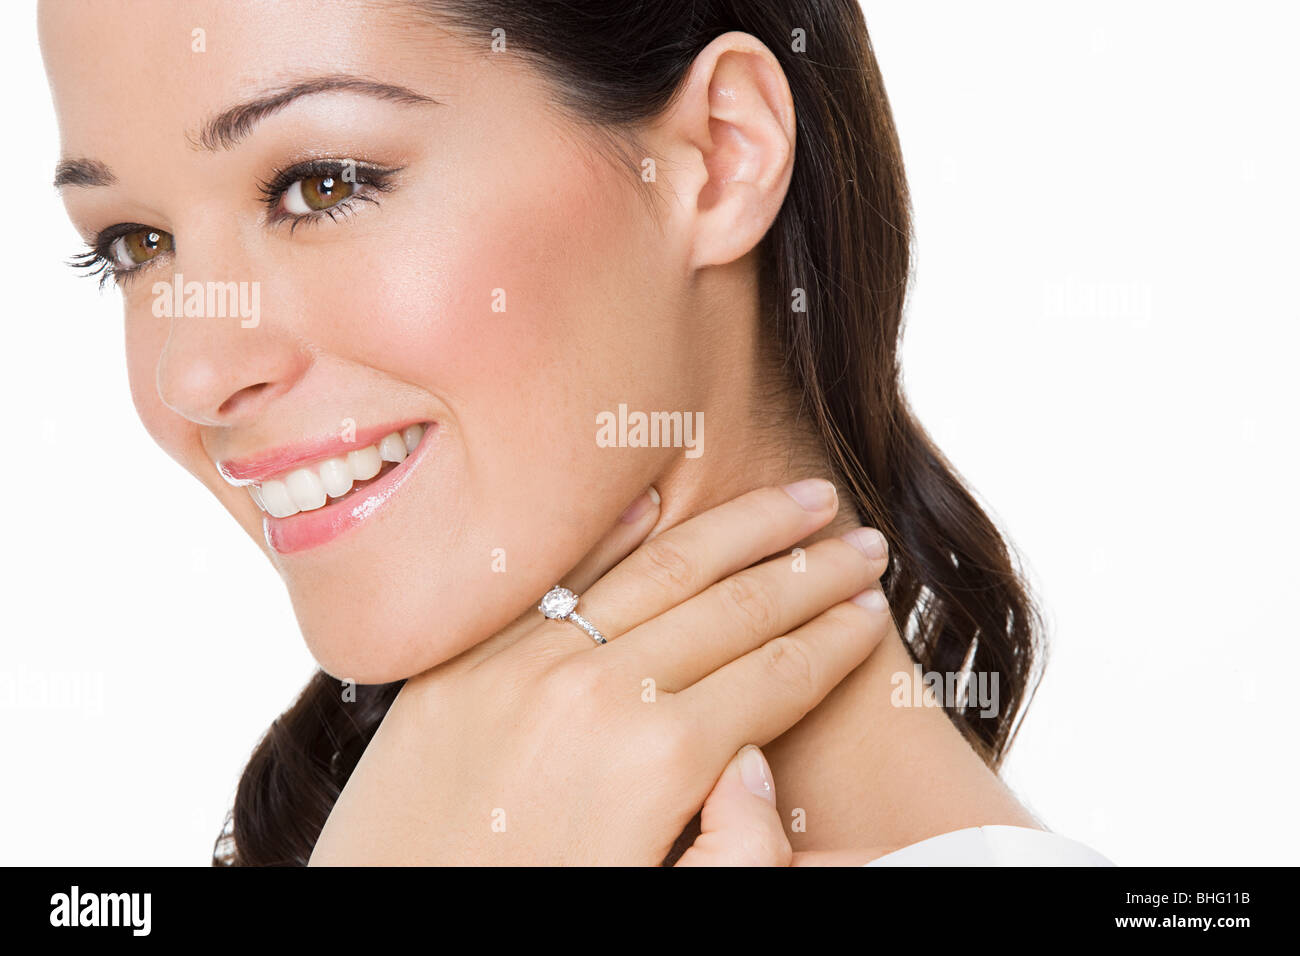 Smiling woman wearing an engagement ring Stock Photo